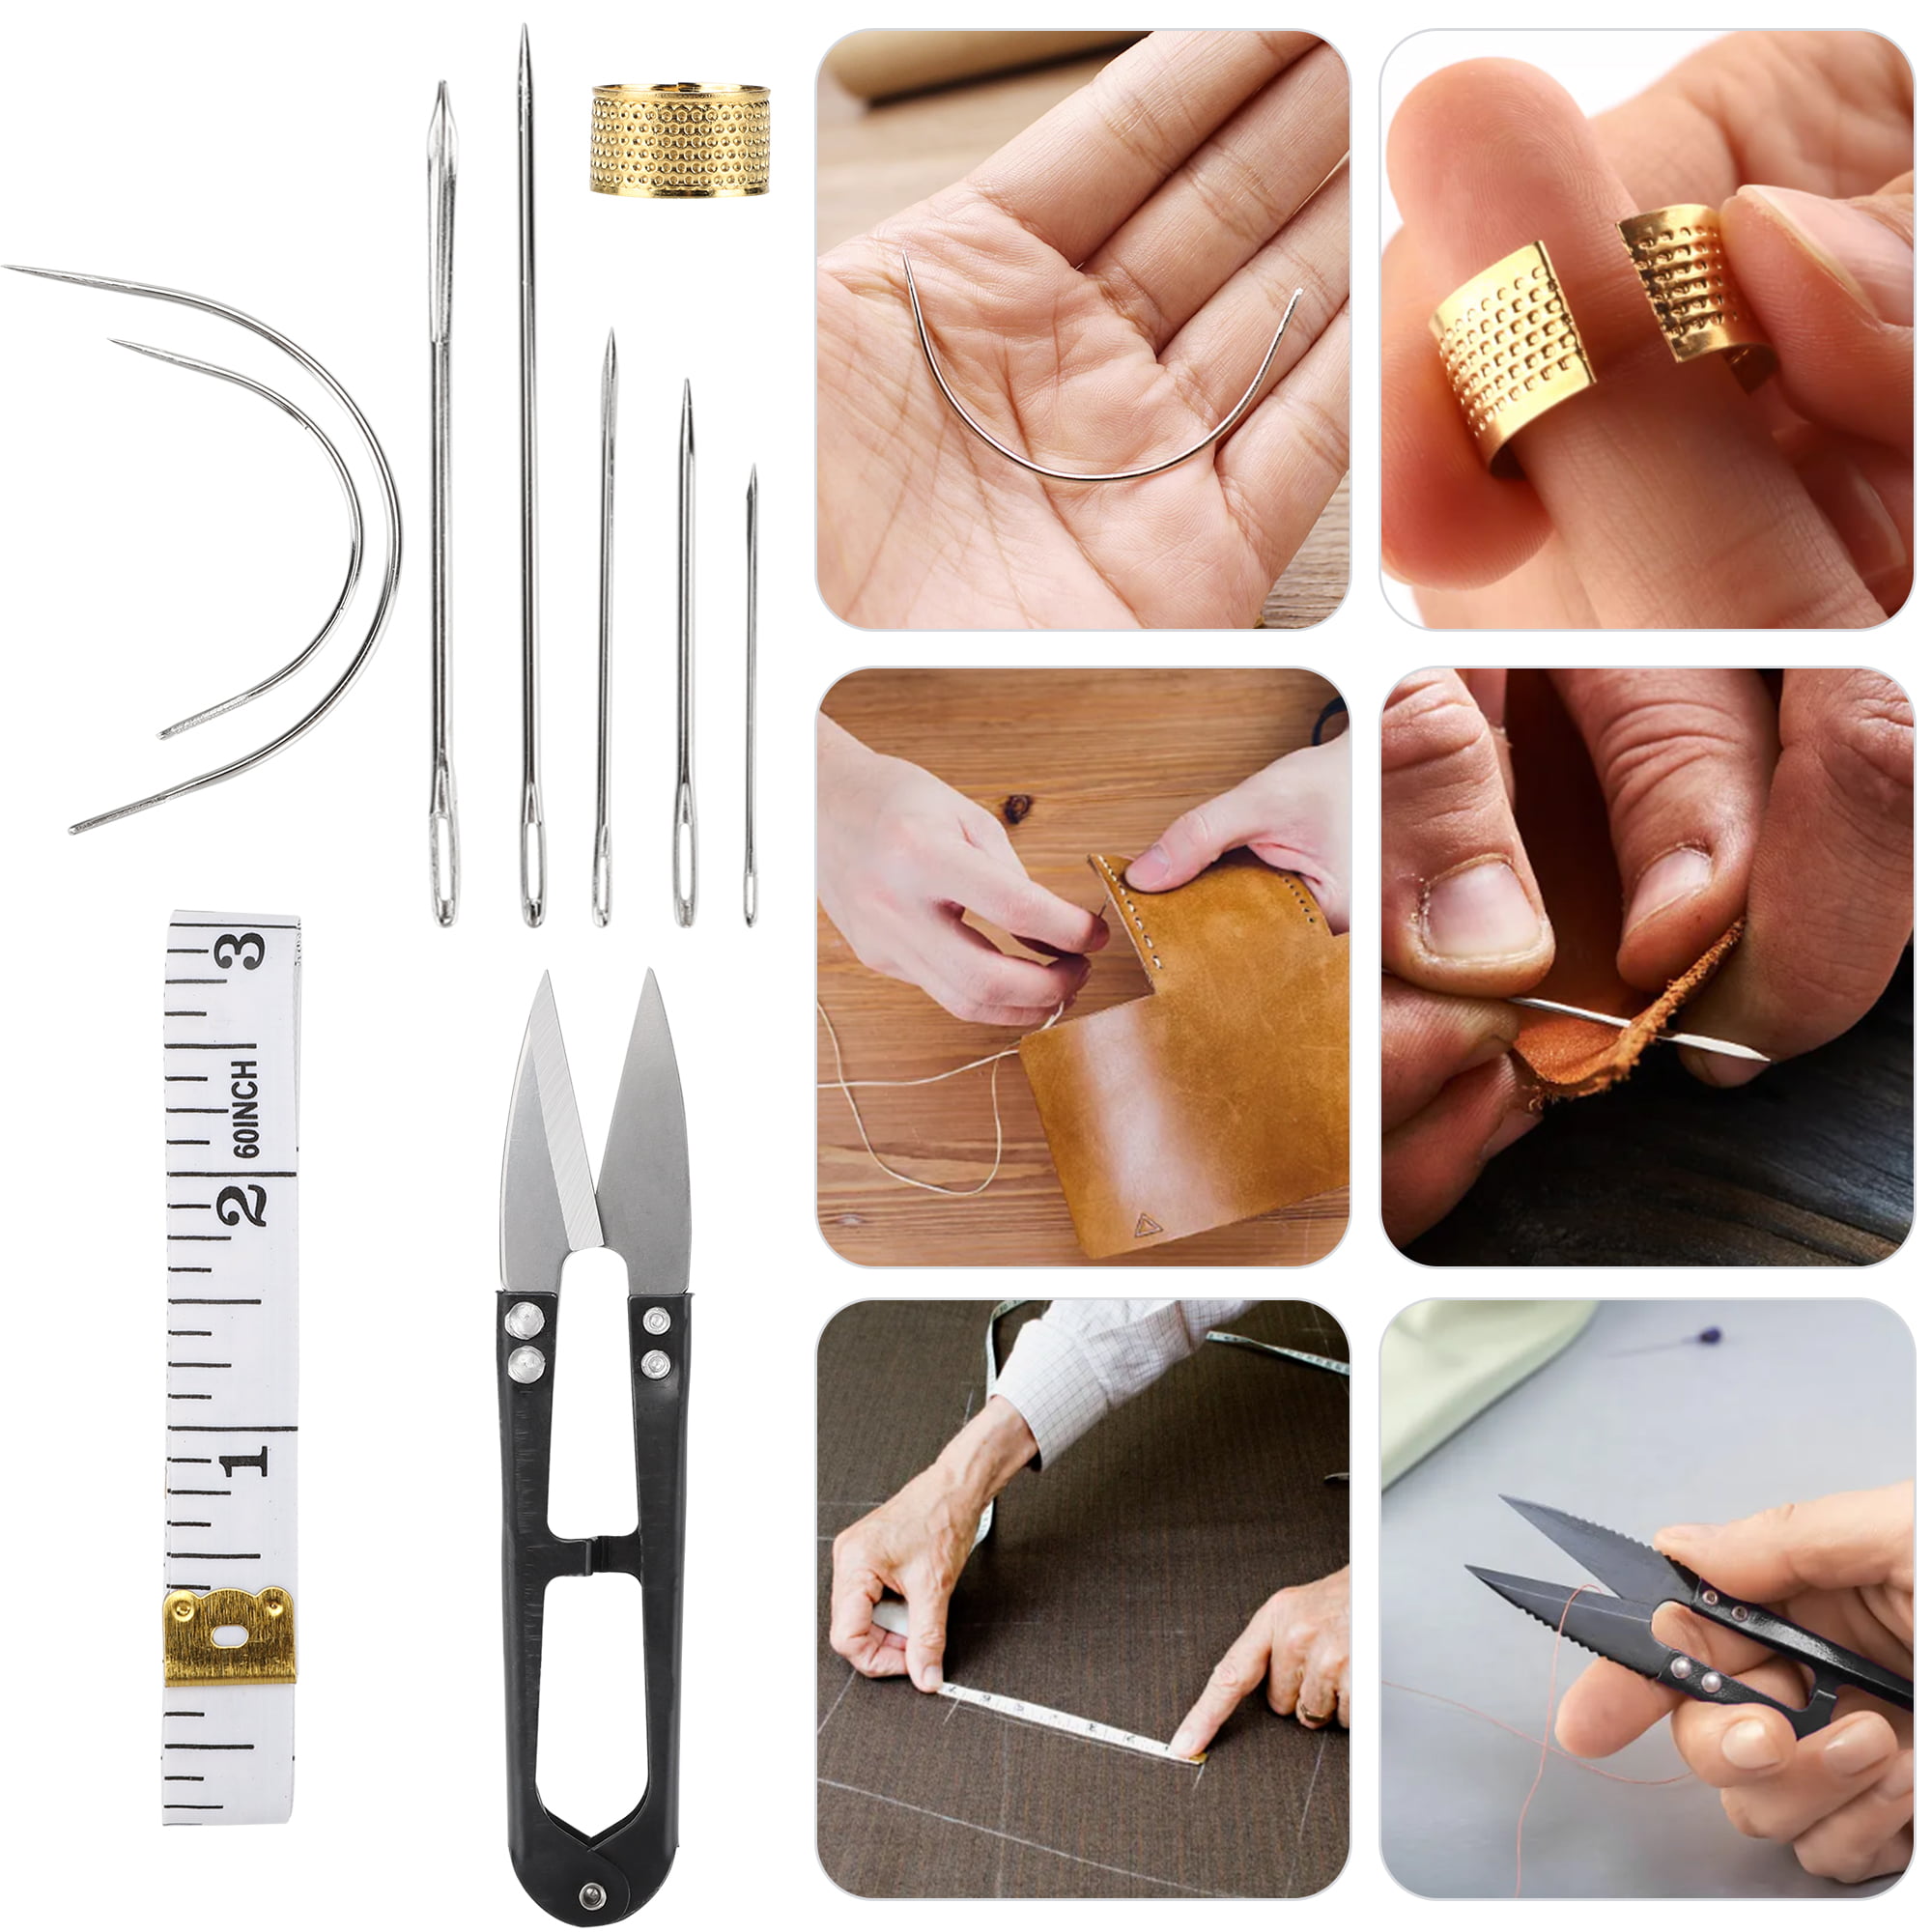 29 Pcs Upholstery Repair Kit, Leather Craft Tools Set Include Wax  Thread&Tape Measure&Hand Sewing Needles&Scissors&Mid-Hole Cone&Log  Cone&Copper Ring Thimble, Canvas DIY Tool Set for Leather Repair